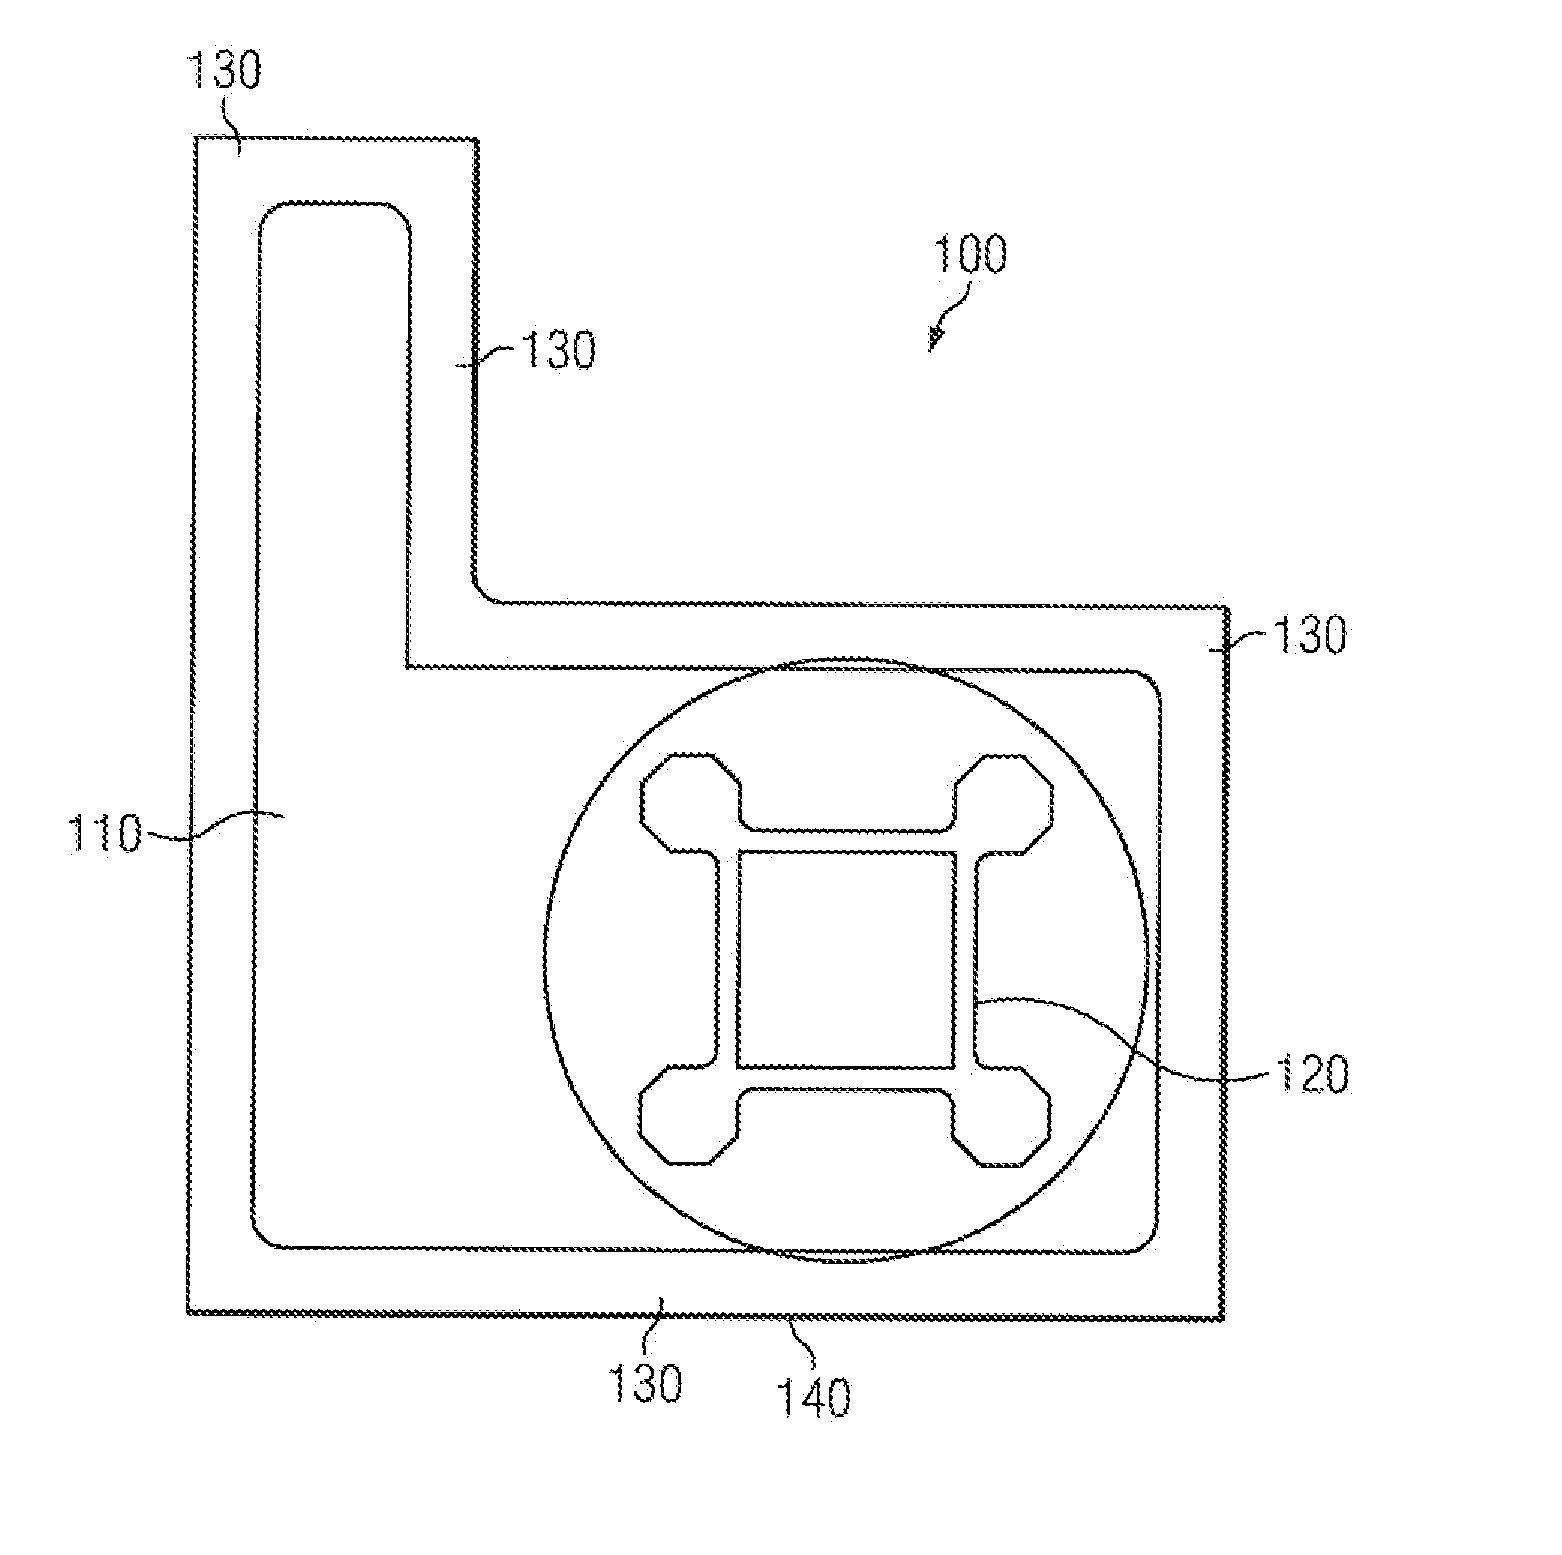 Device contactor with integrated RF shield